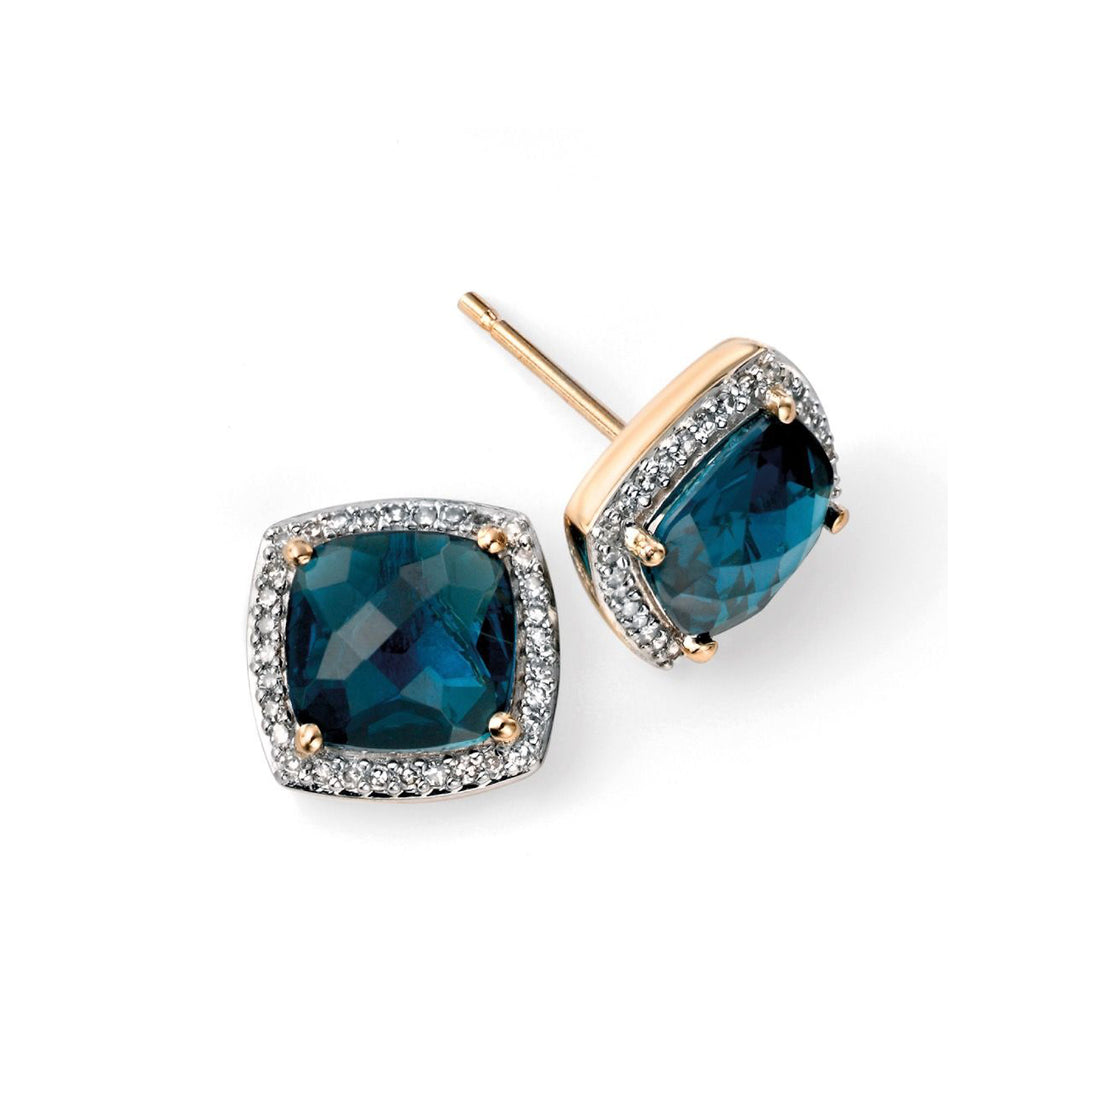 Checkerboard London Blue Topaz Earrings with Diamond in 9ct Yellow Gold